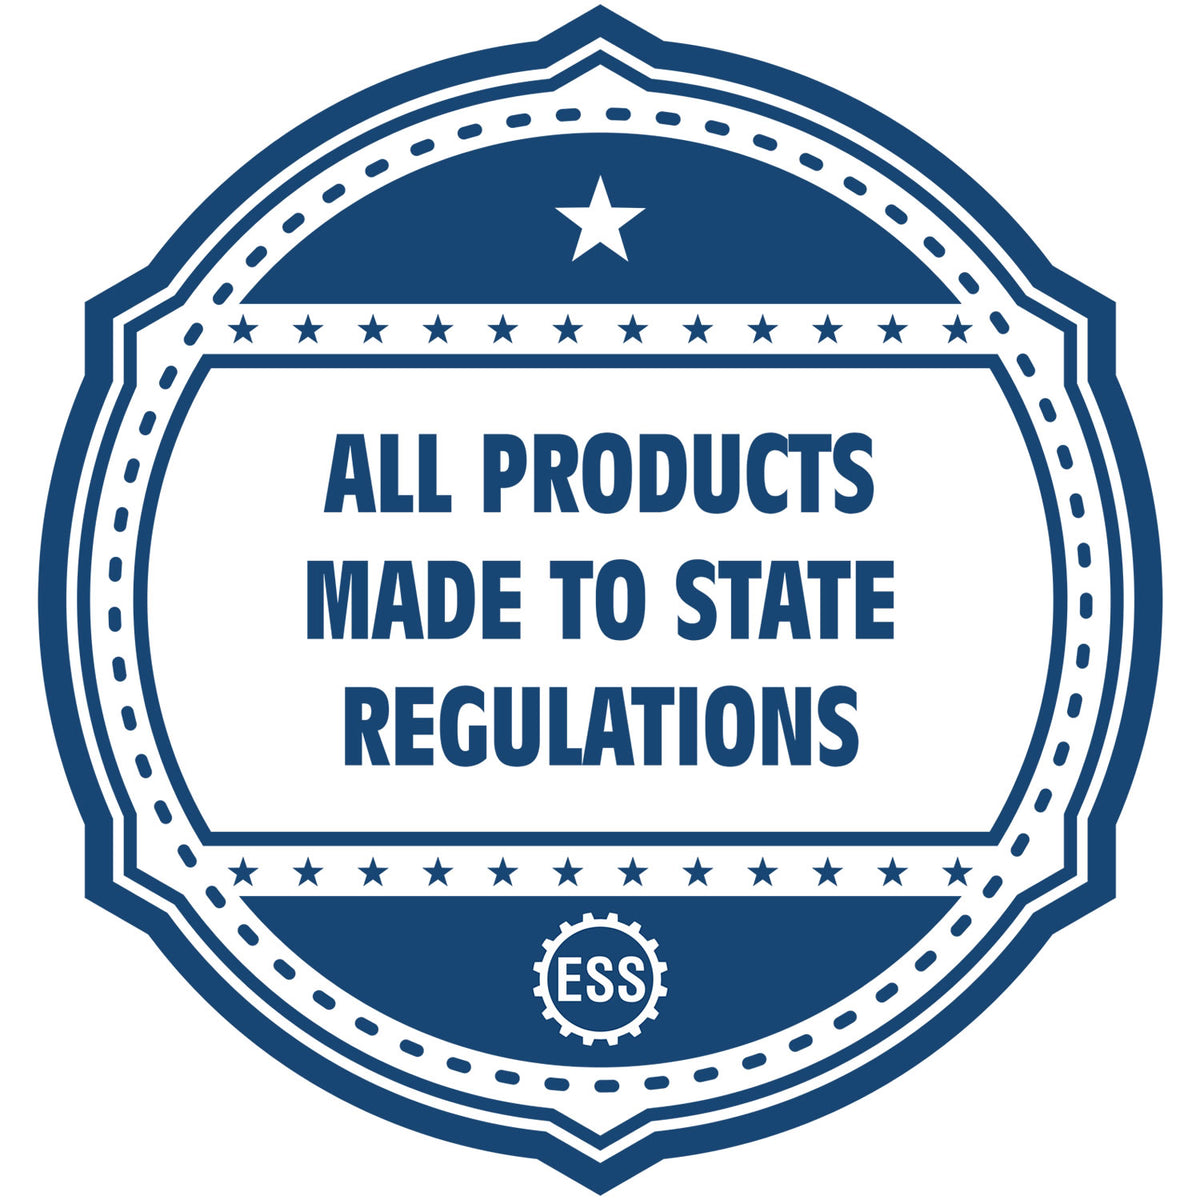 A blue icon or badge for the Hybrid Washington Architect Seal showing that this product is made in compliance with state regulations.